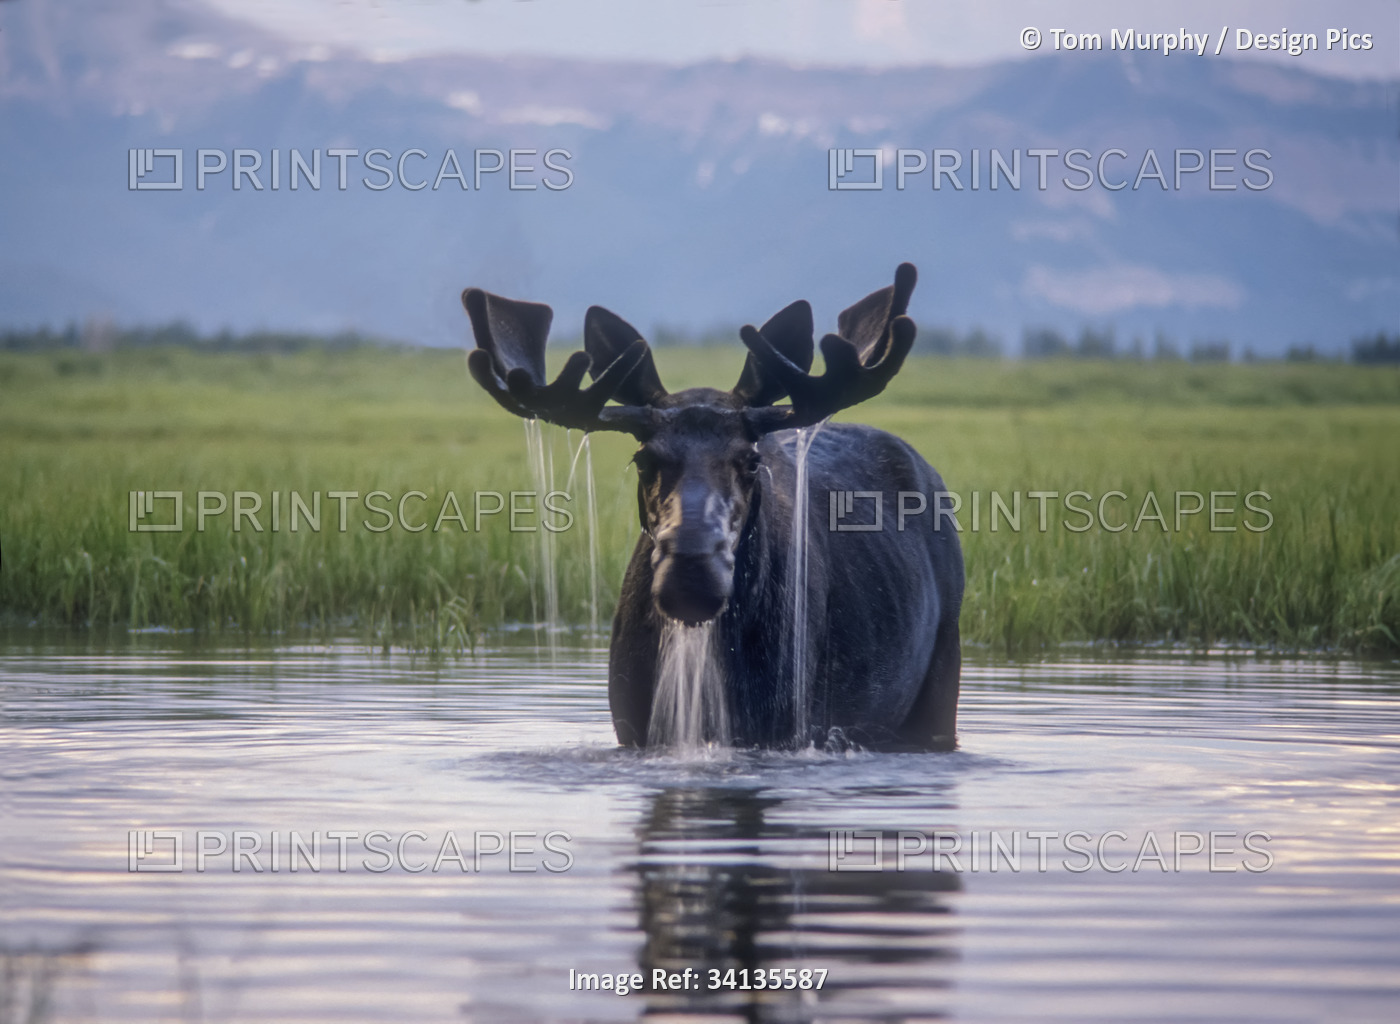 Water pours from the antlers of a bull moose (Alces alces) lifting his head ...